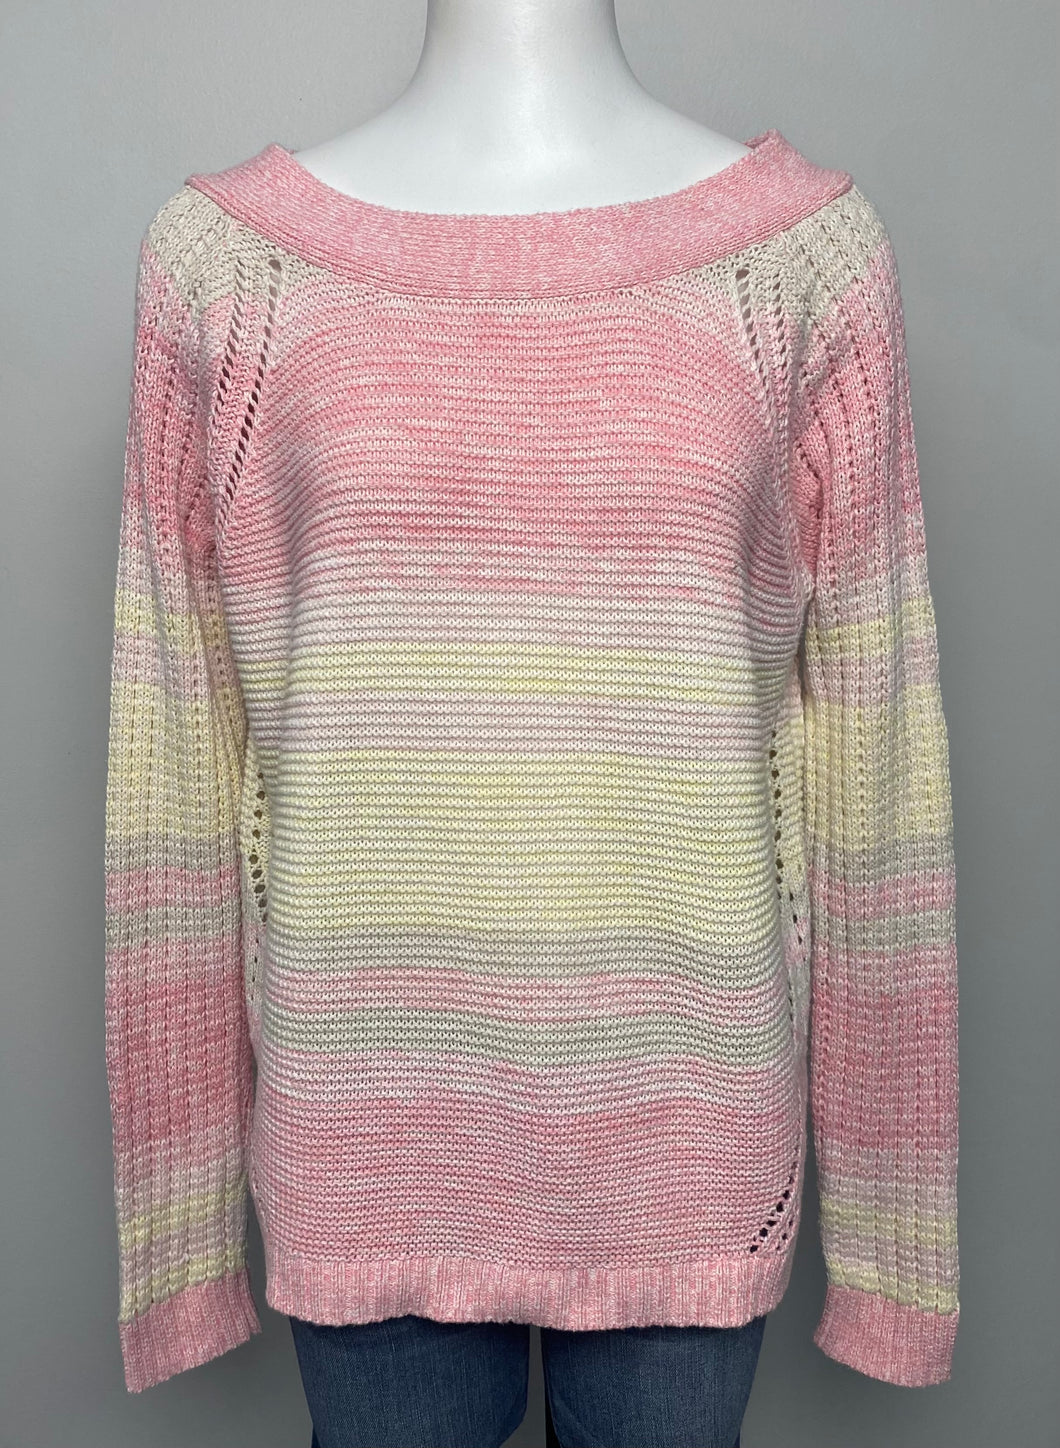 Maurices Knit Sweater- (L)